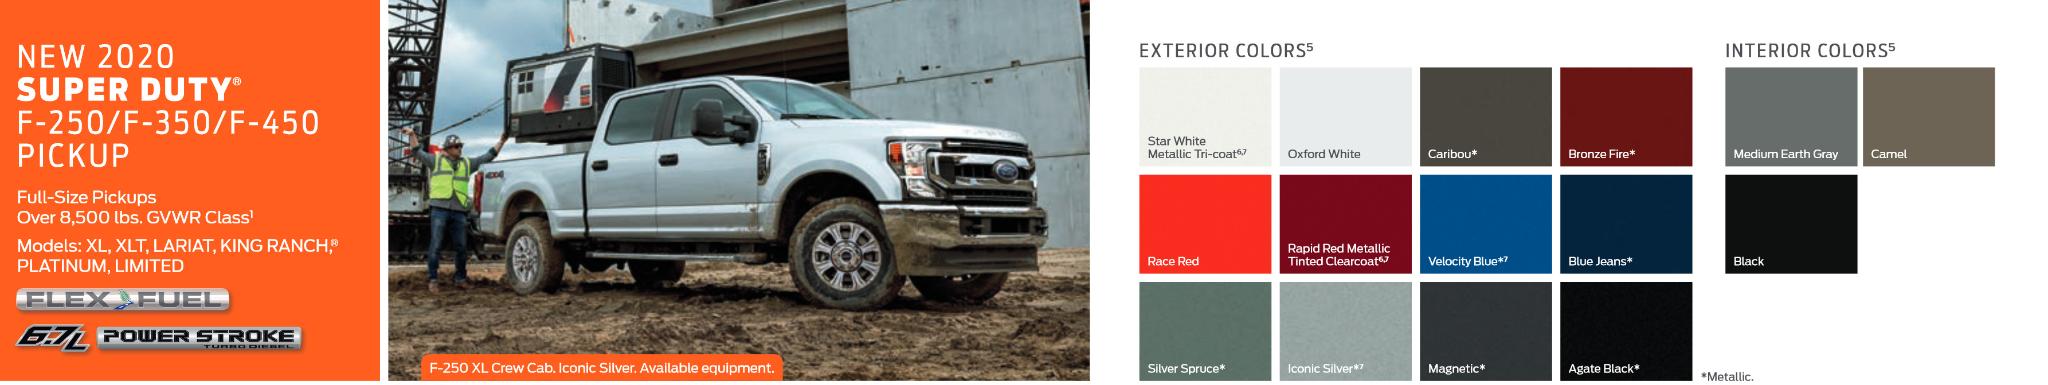 Colors used on Ford Super Duty in 2020